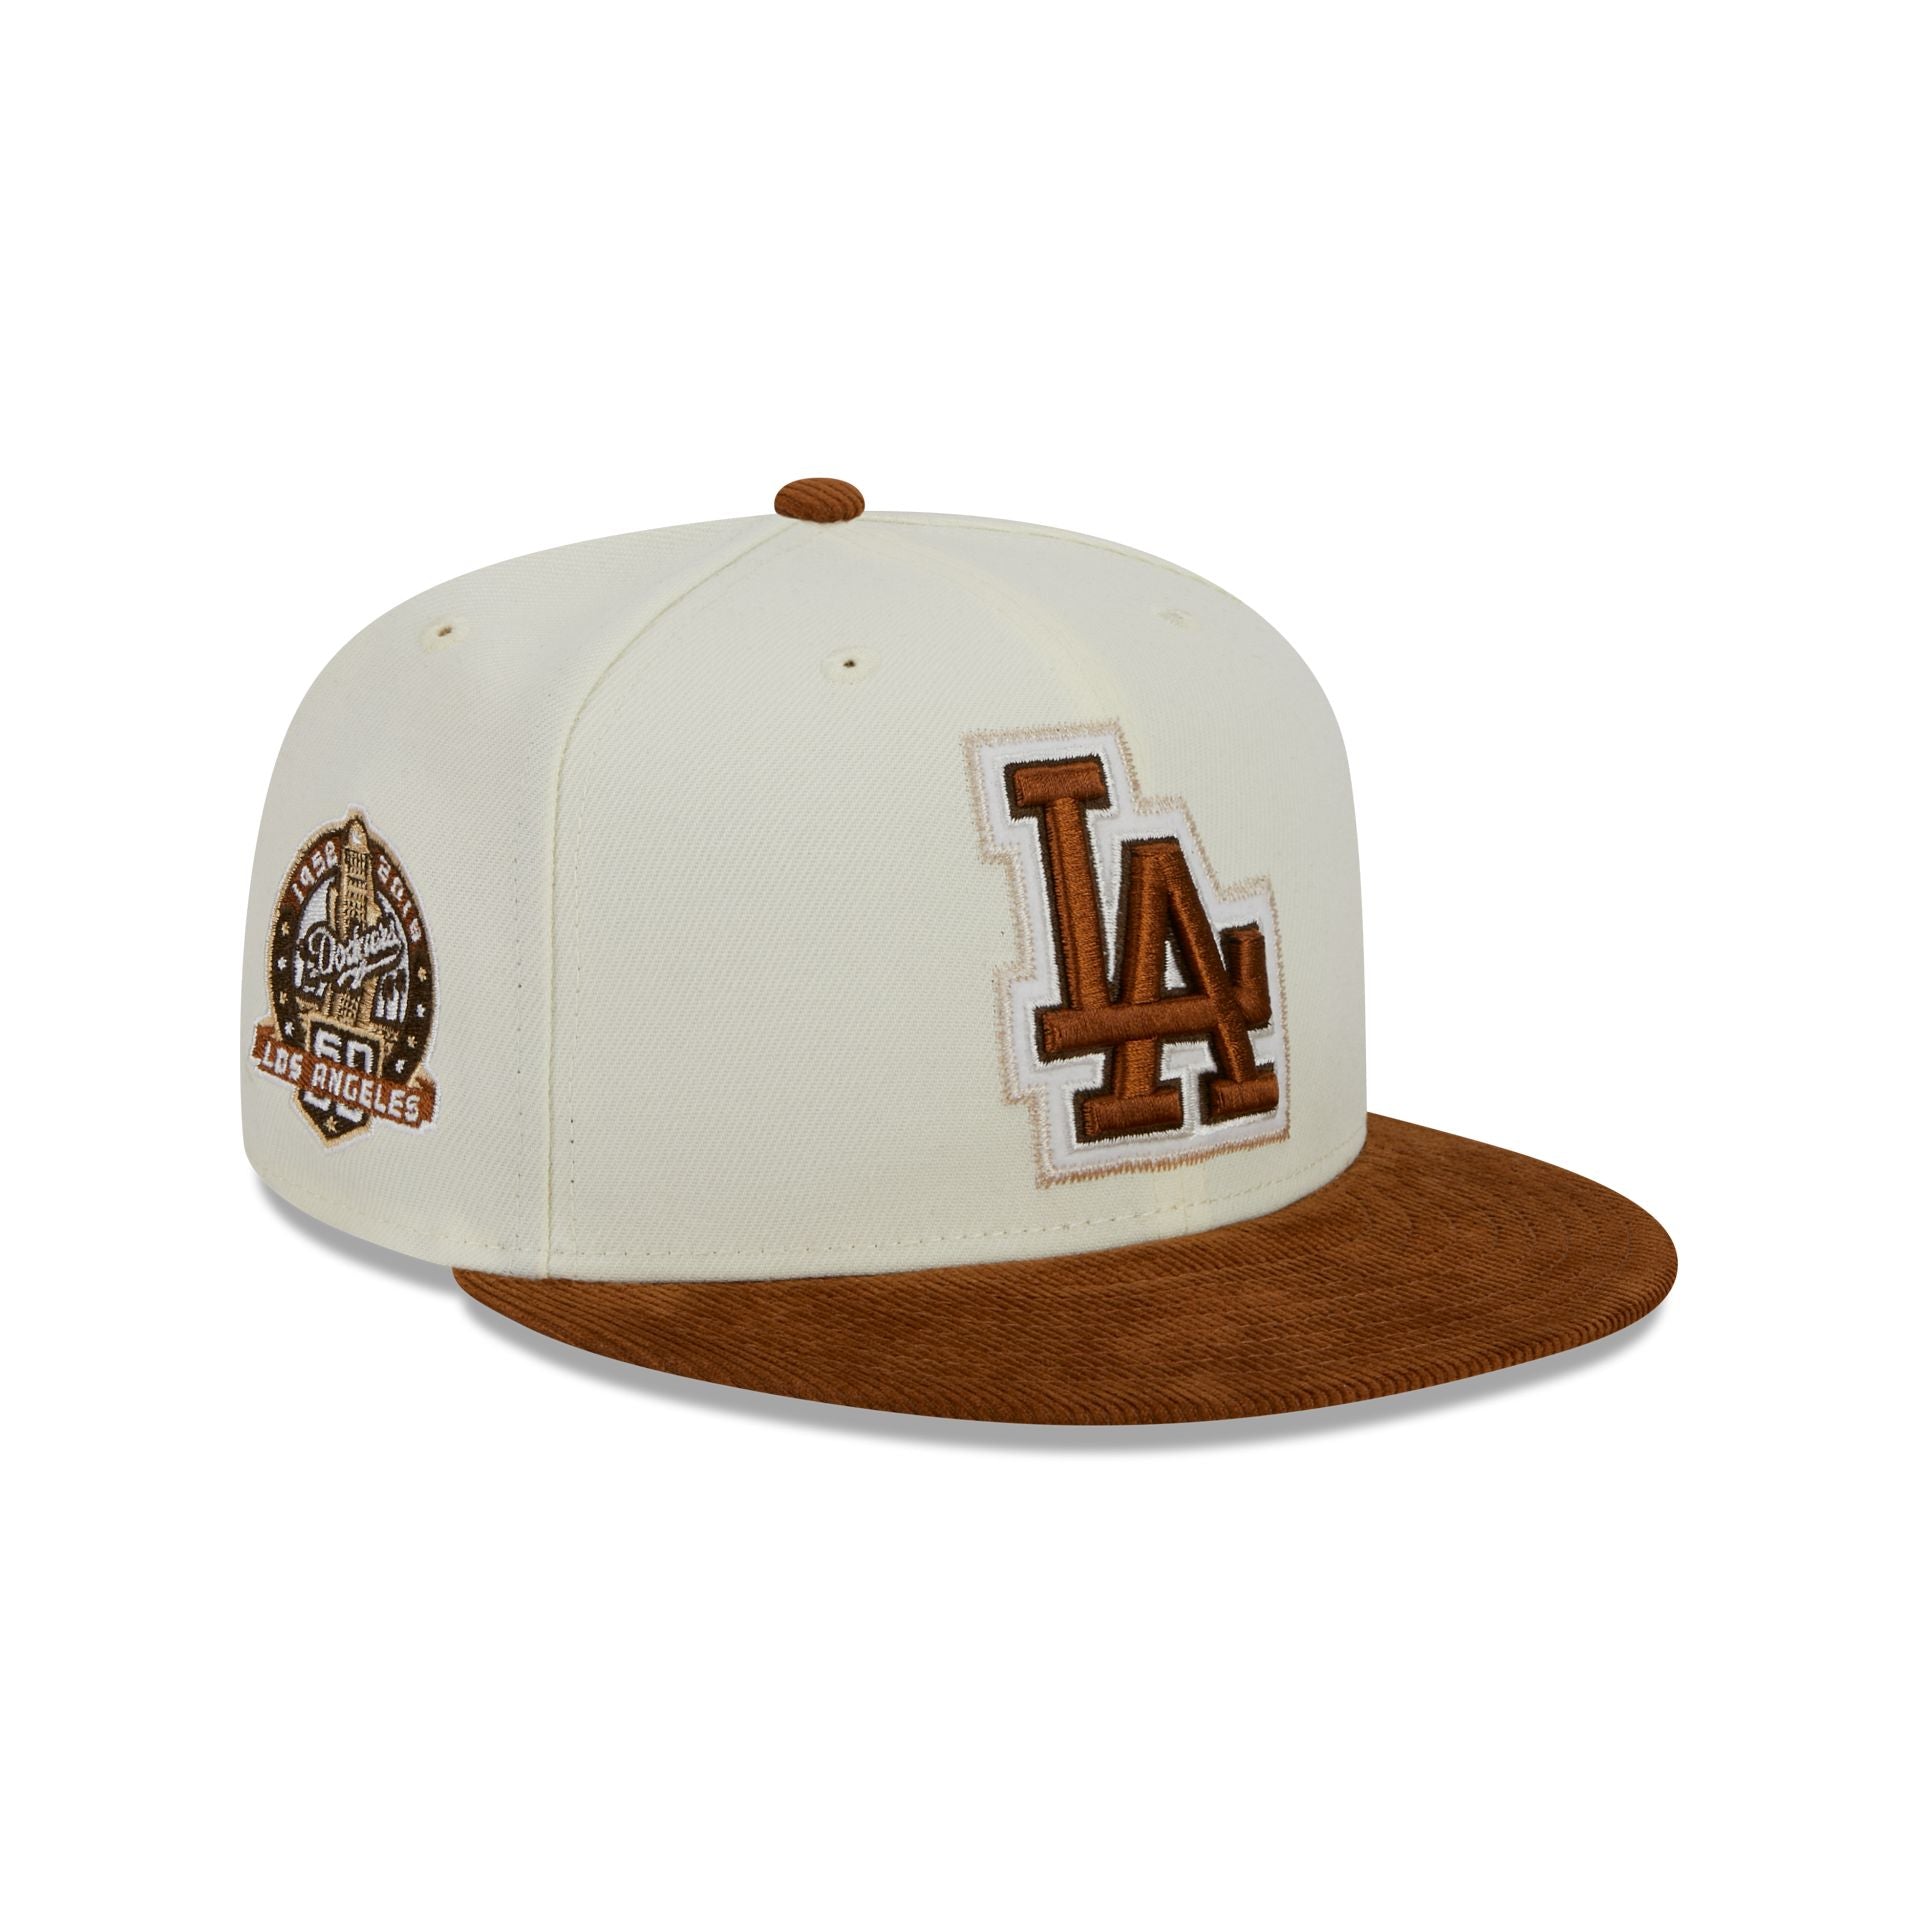 Los Angeles Dodgers Cord 59FIFTY Fitted Hat, White - Size: 8, MLB by New Era